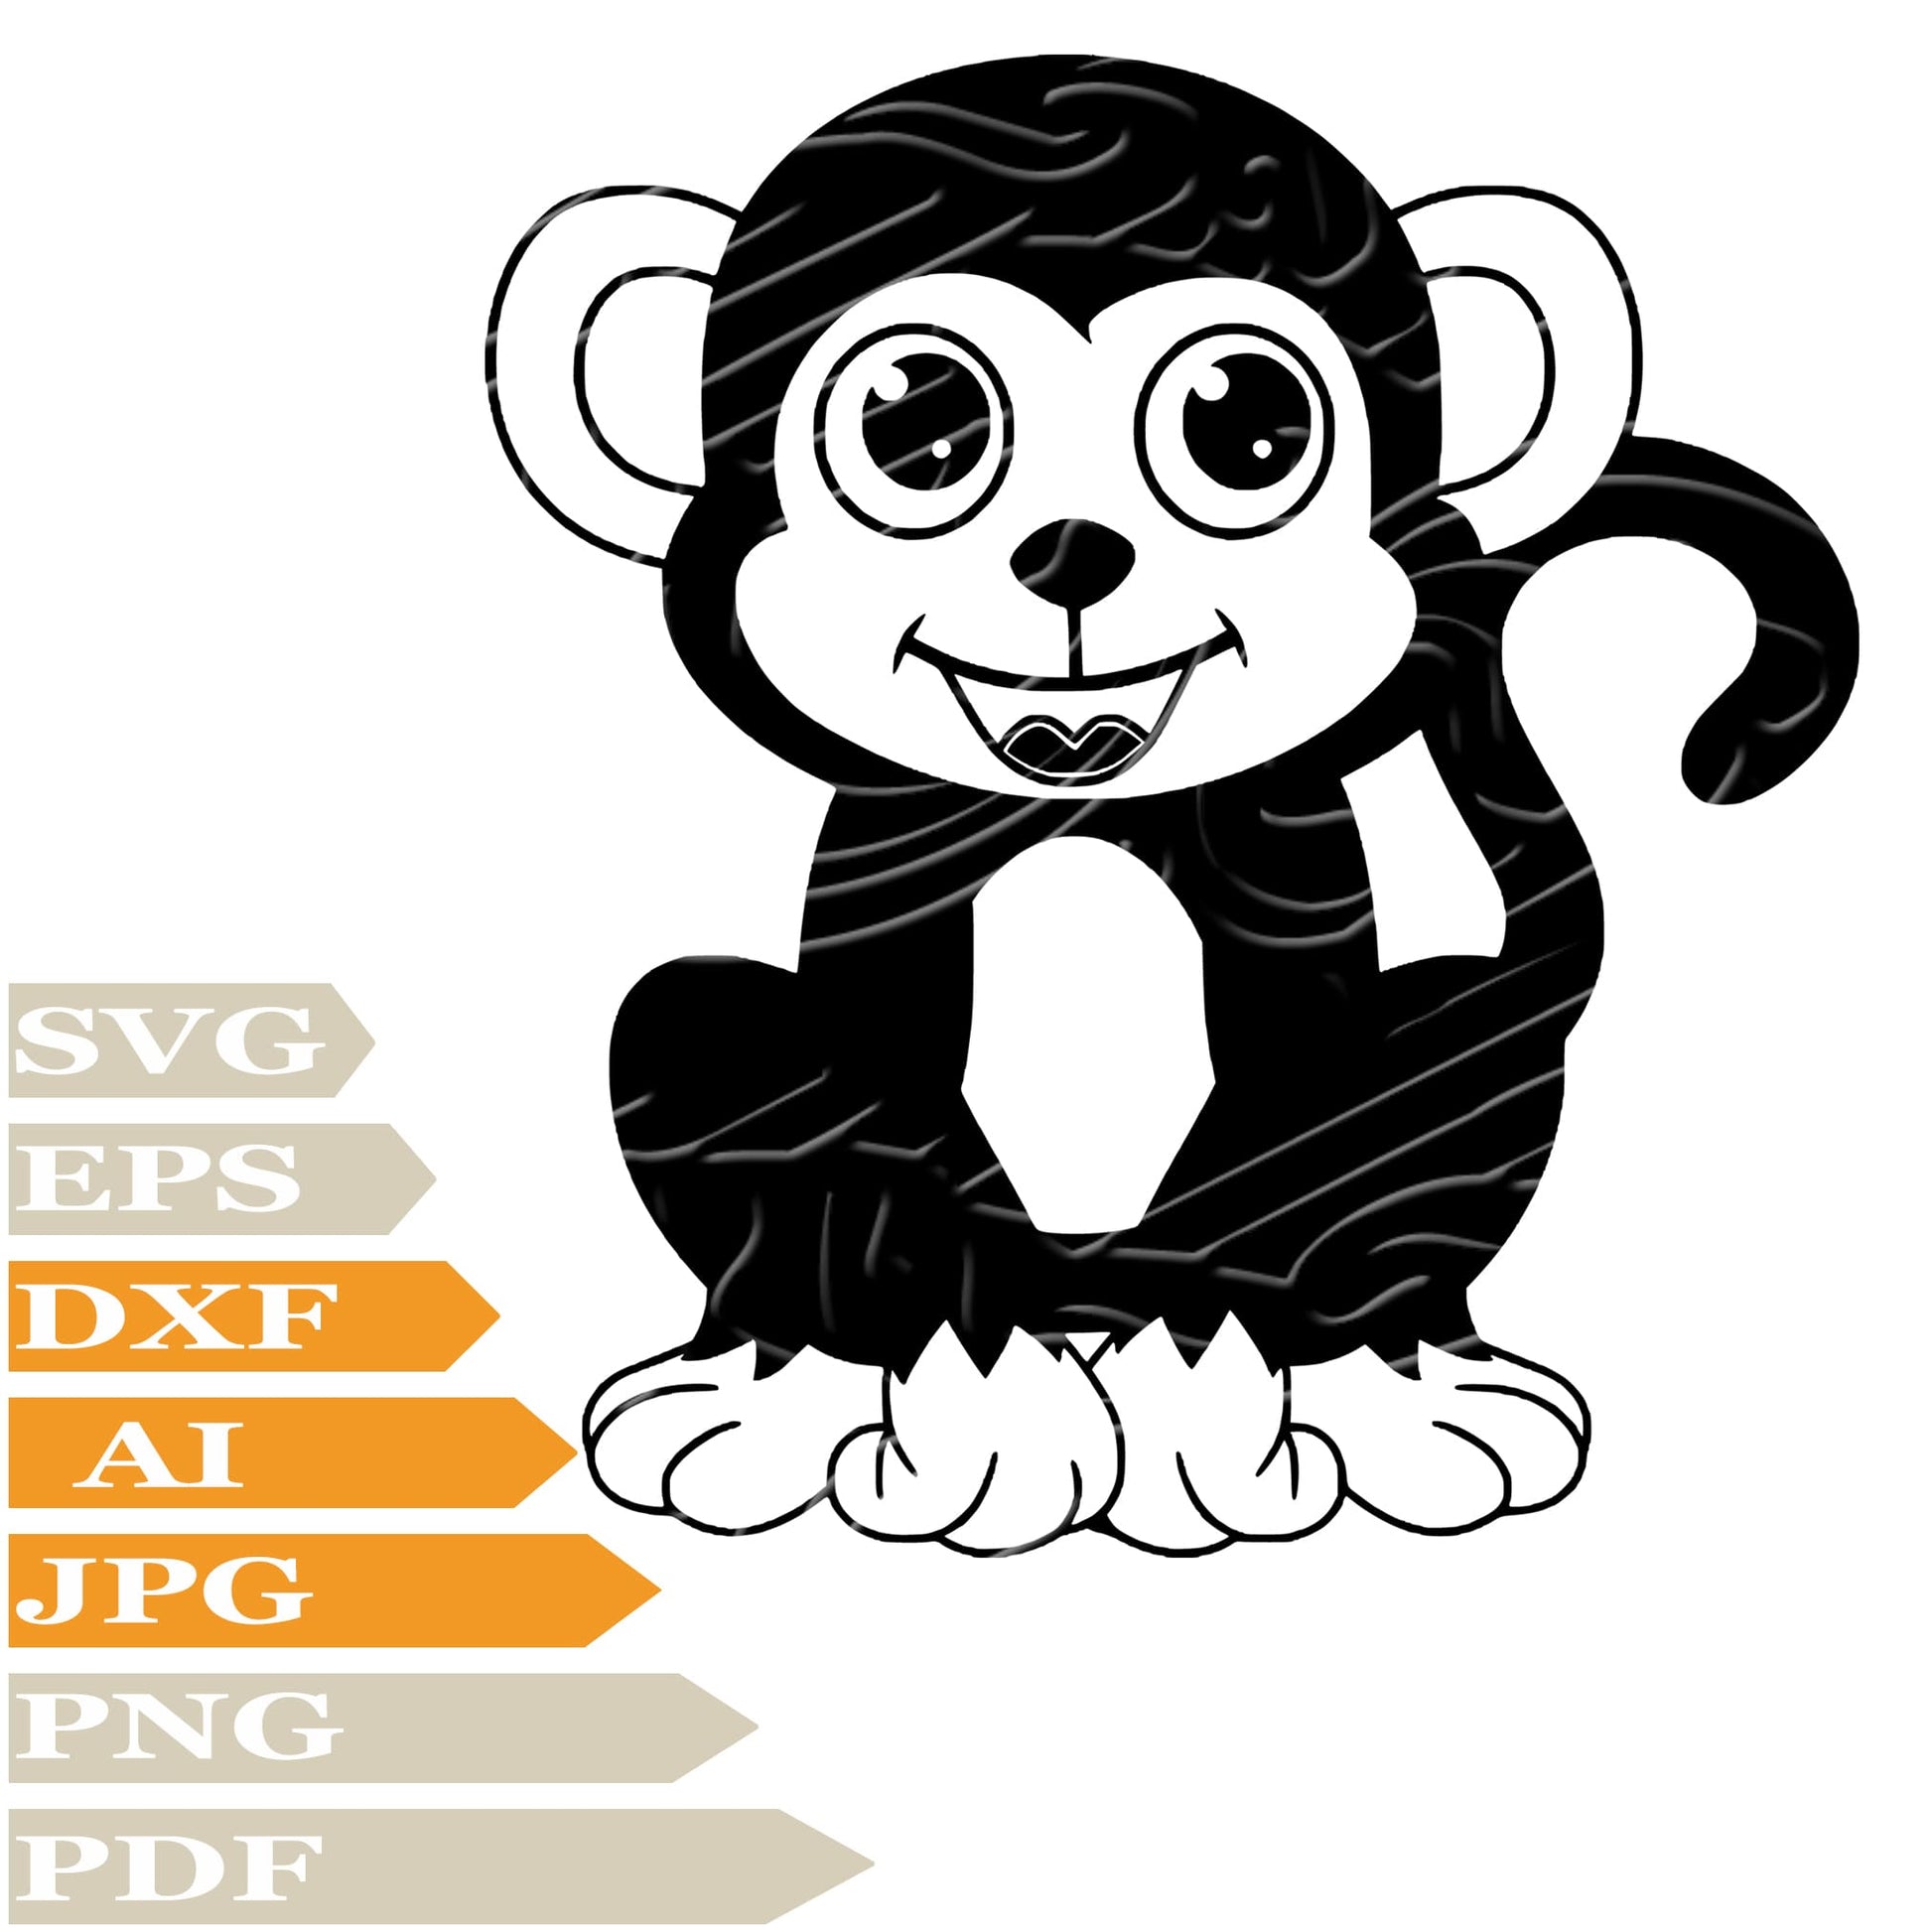 Monkey, Funny Monkey Svg File, Image Cut, Png, For Tattoo, Silhouette, Digital Vector Download, Cut File, Clipart, For Cricut